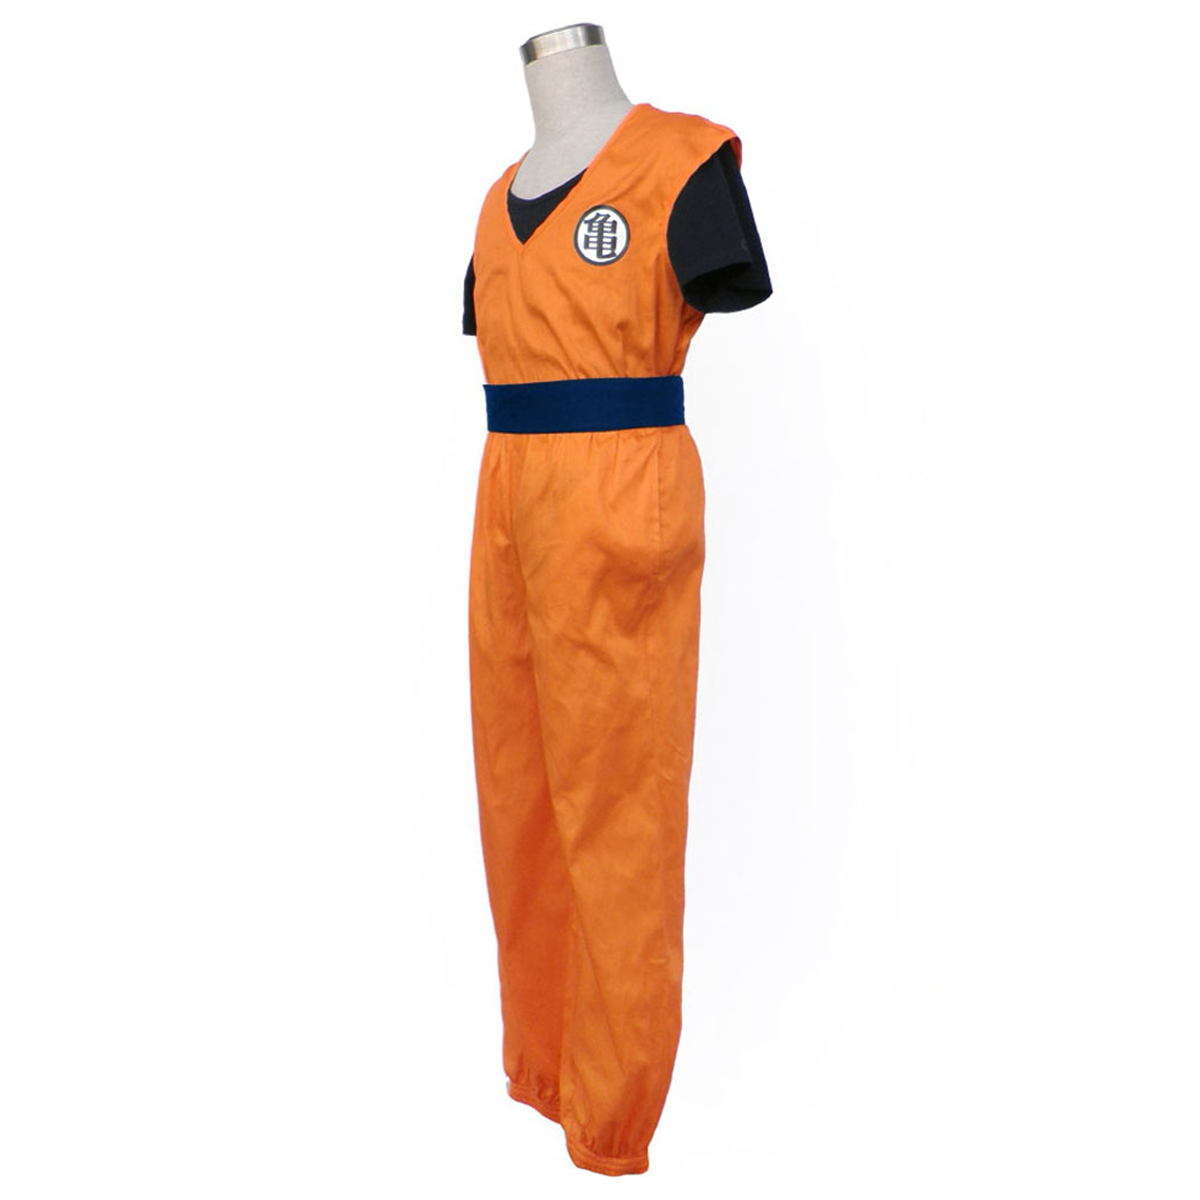 Dragon Ball Krillin Anime Cosplay Costumes Outfit